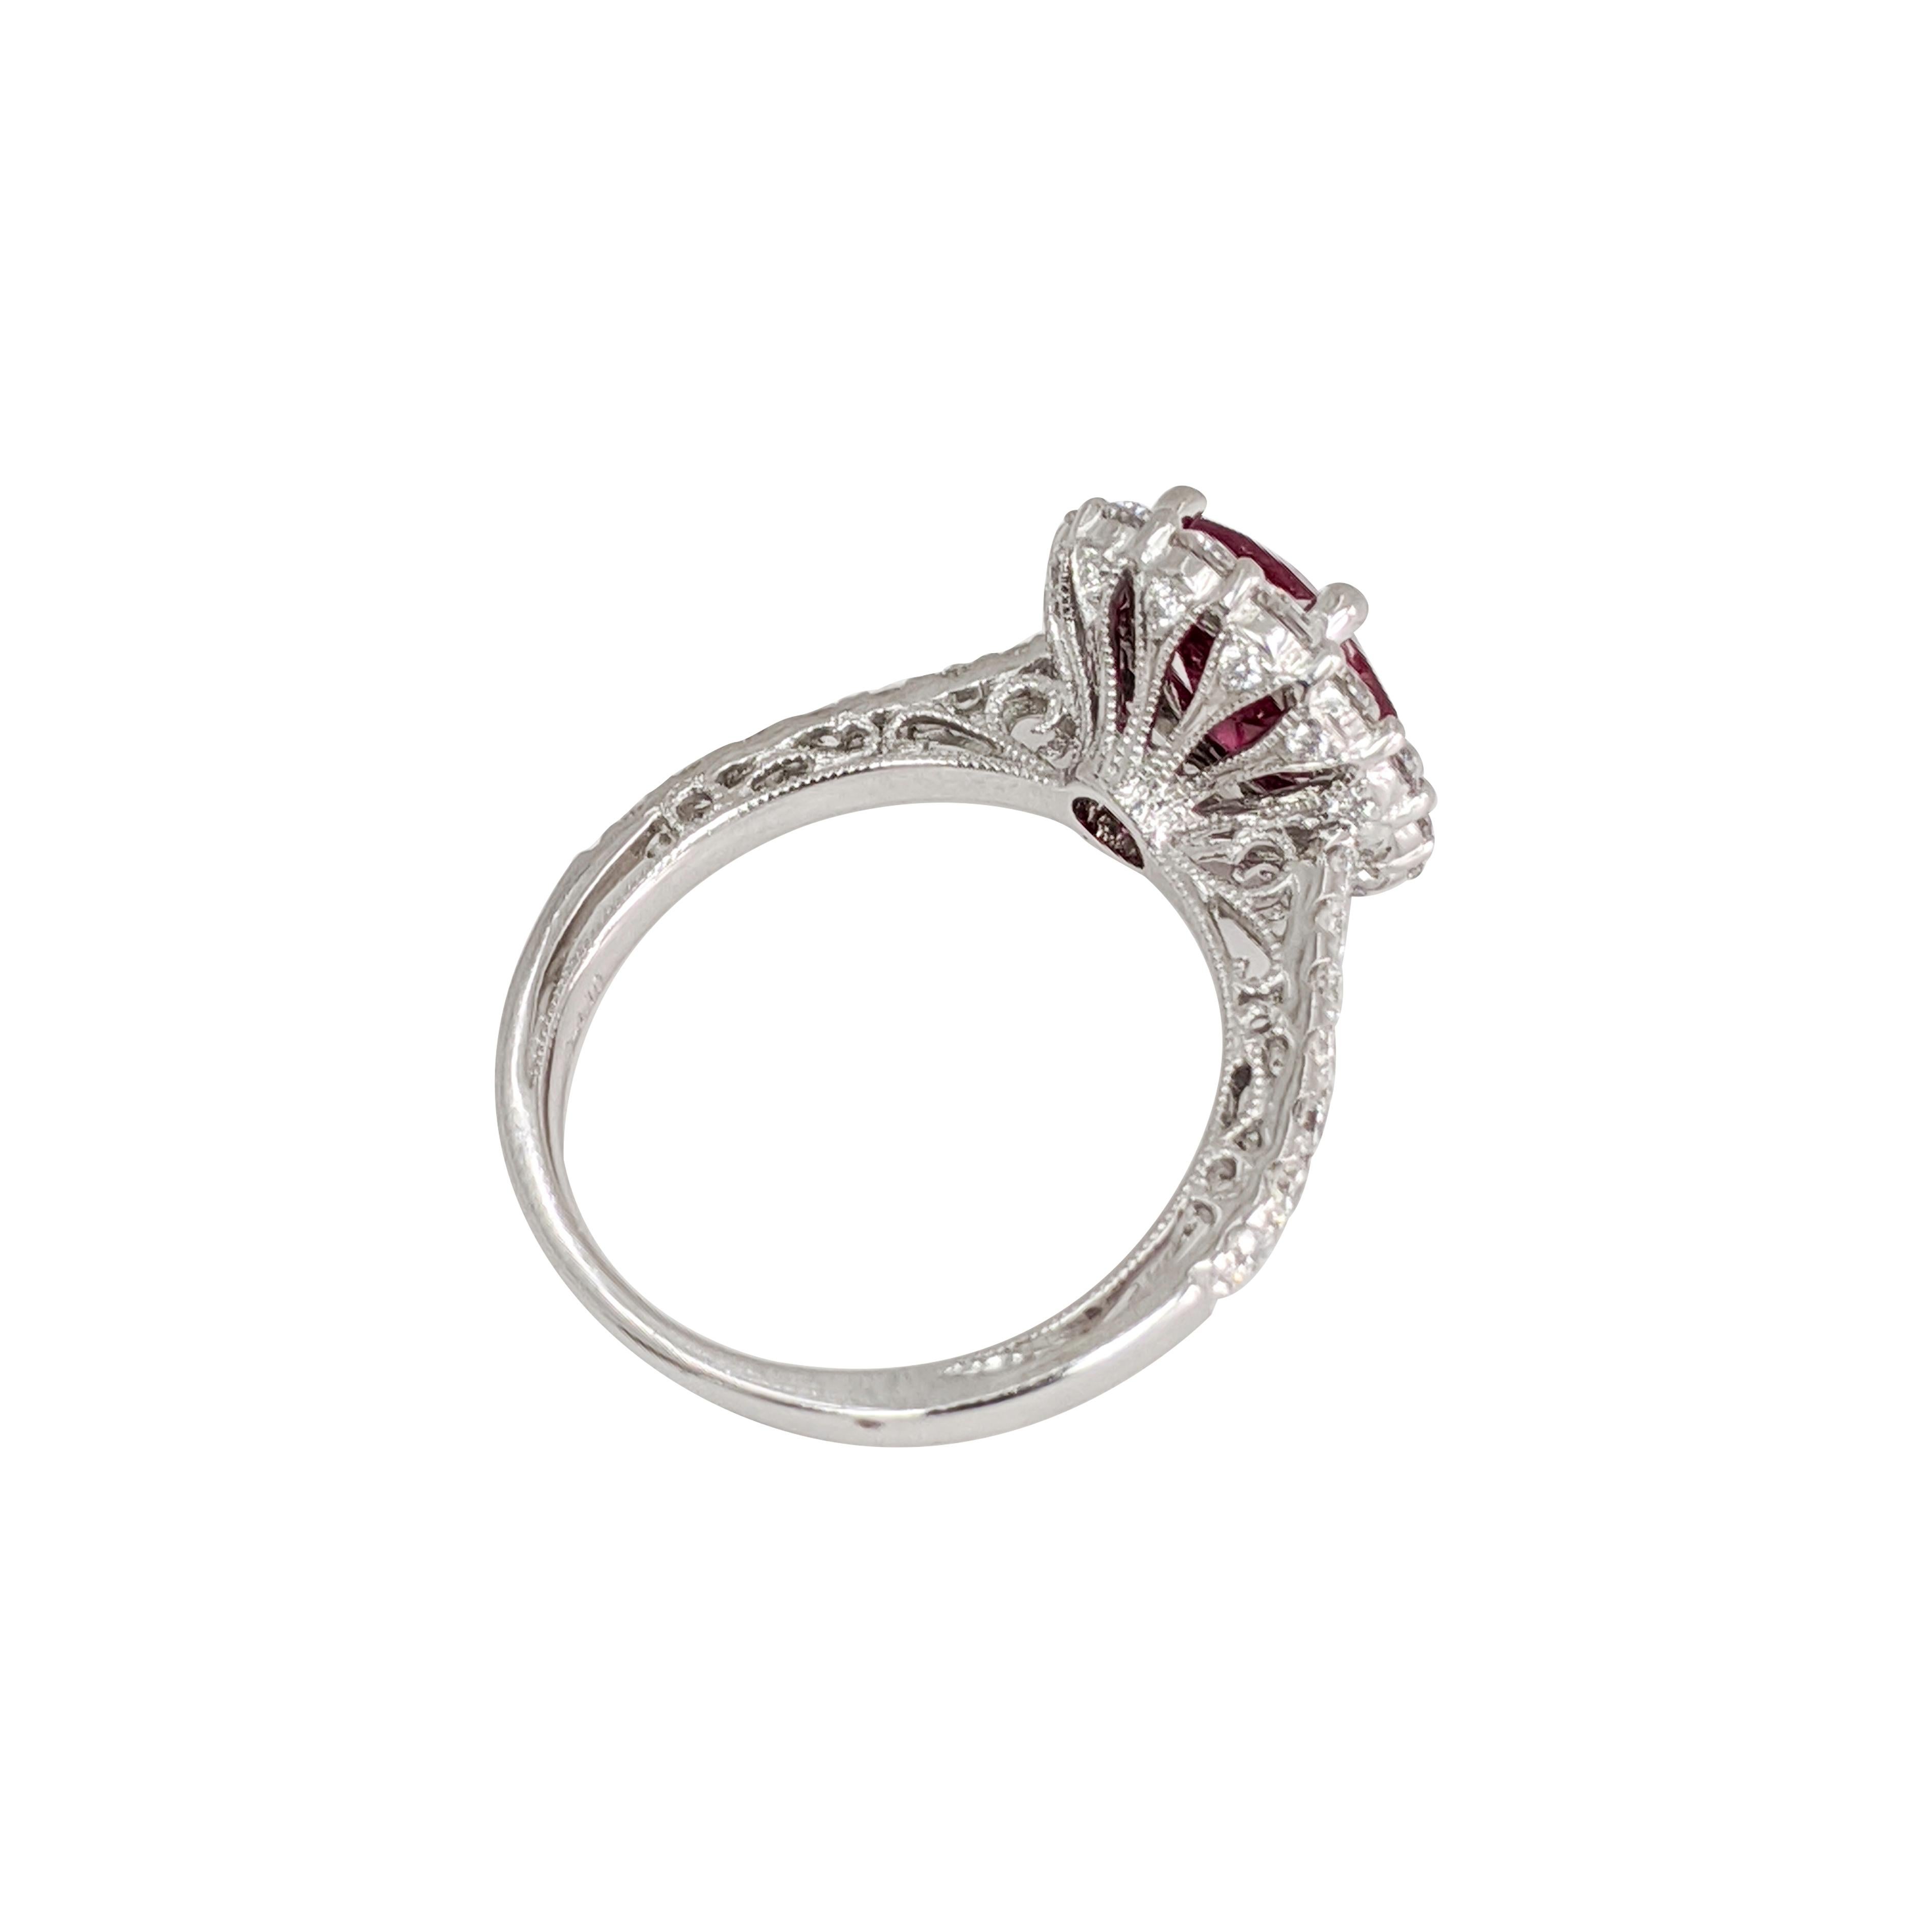 Women's or Men's Fashion Ruby Ring, Diamond and Platinum Ring